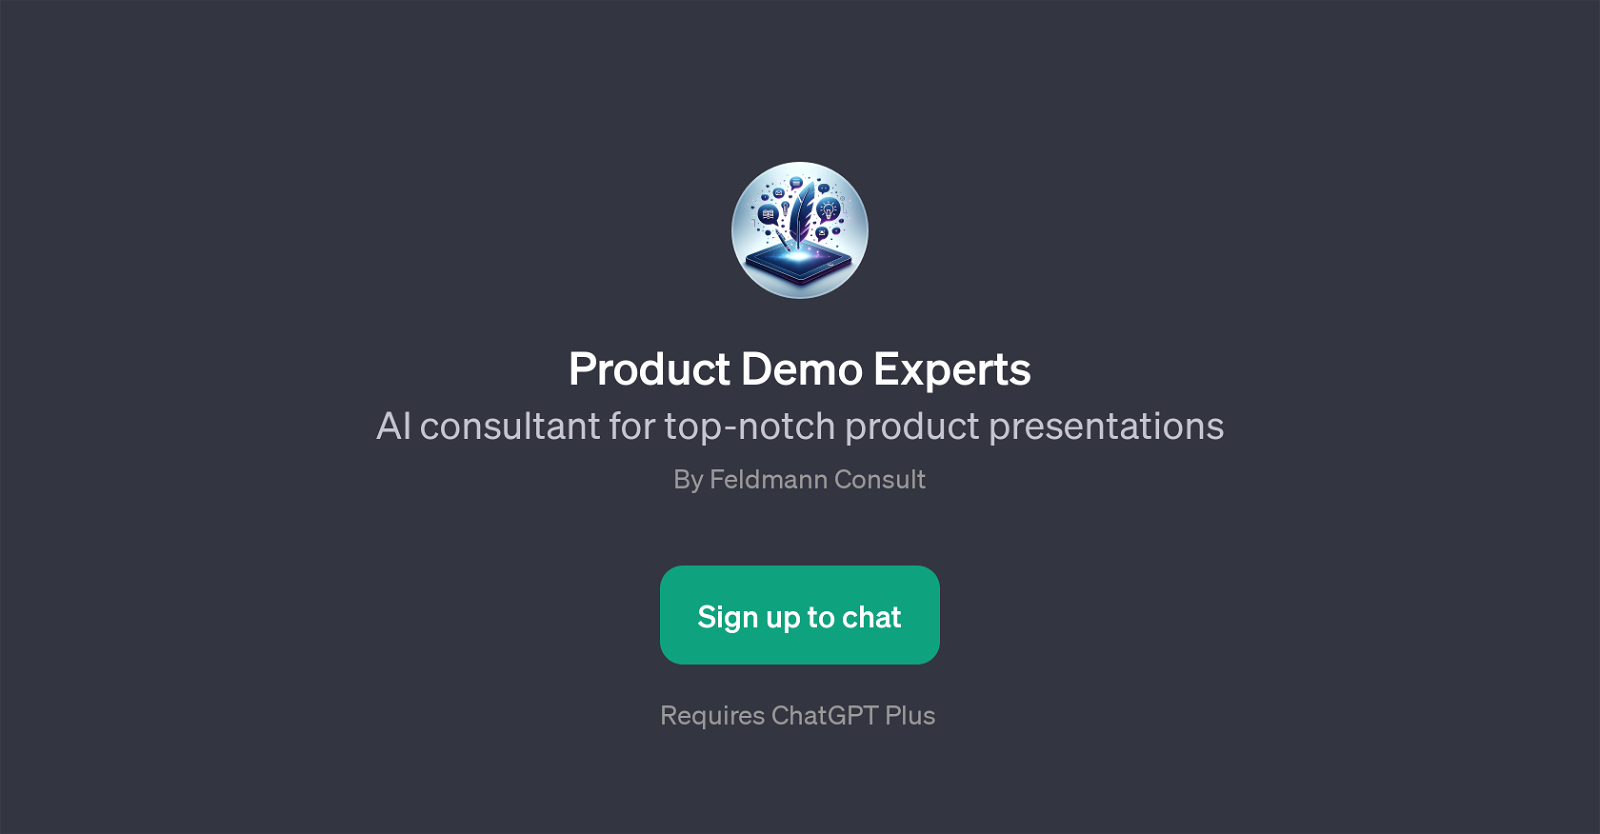 Product Demo Experts website